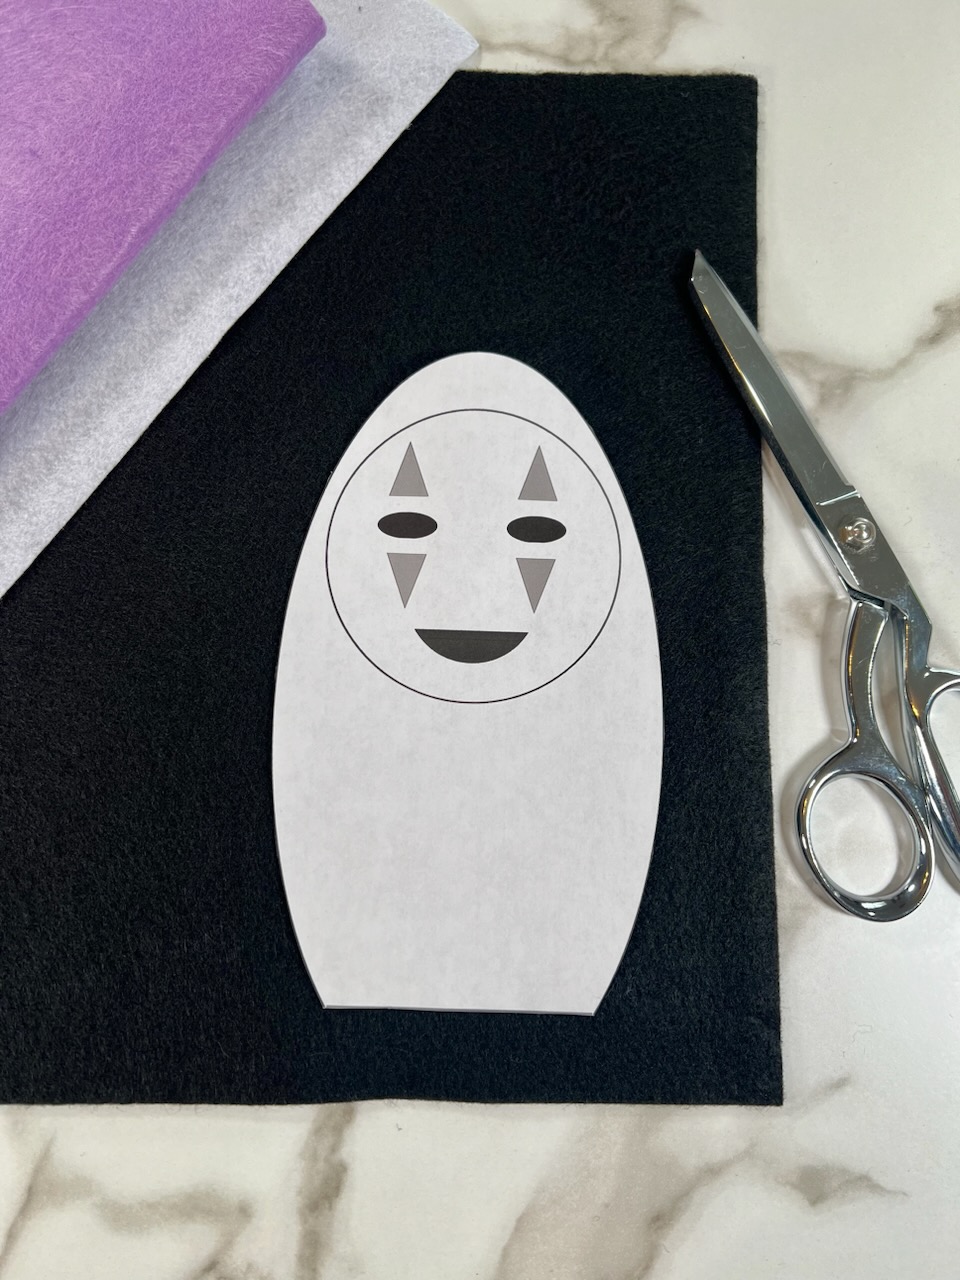 spirited away character with felt and scissors